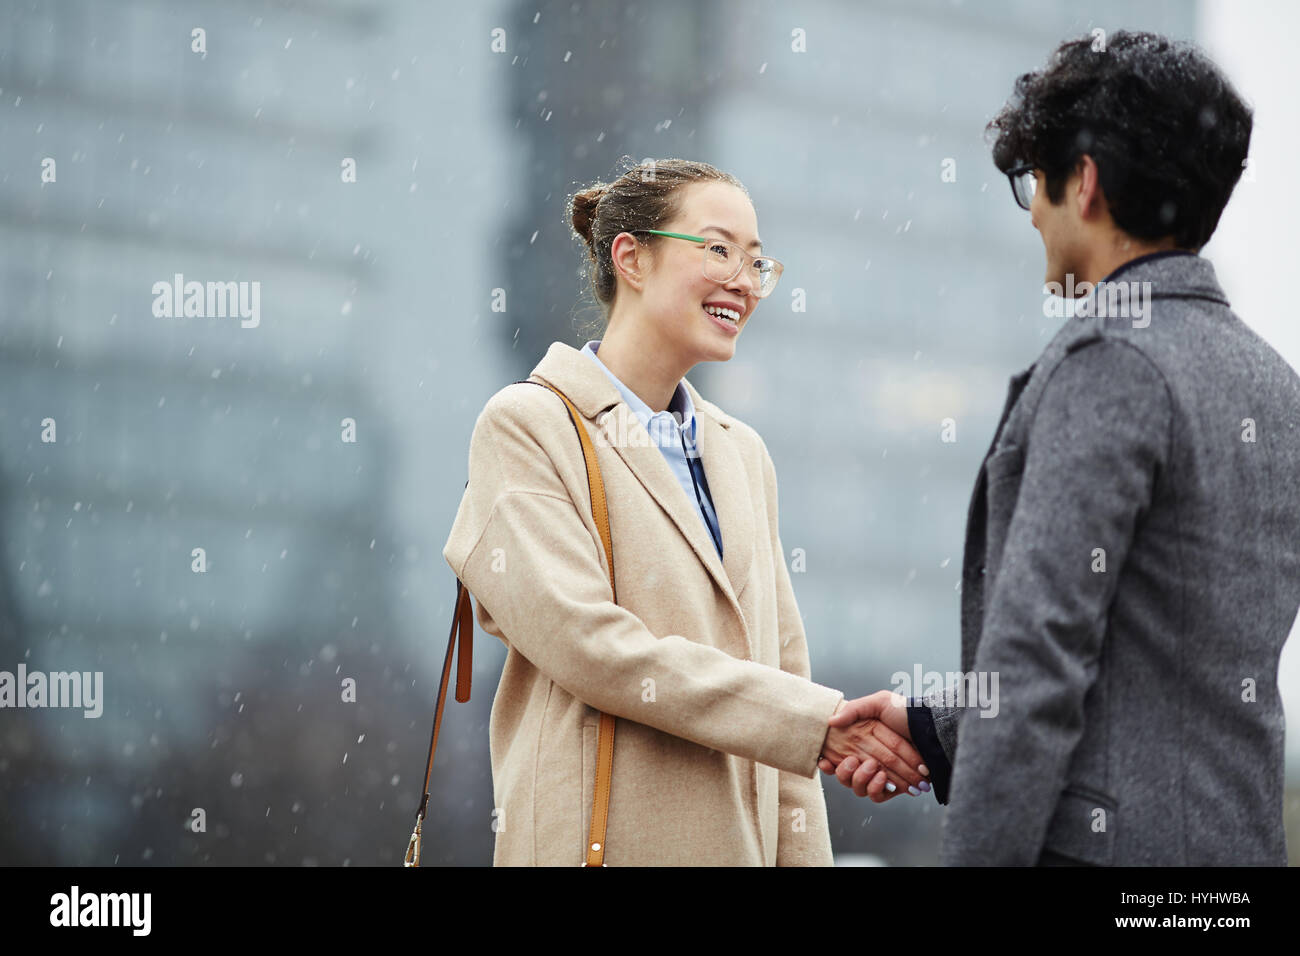 Business People  Greeting in Street Stock Photo